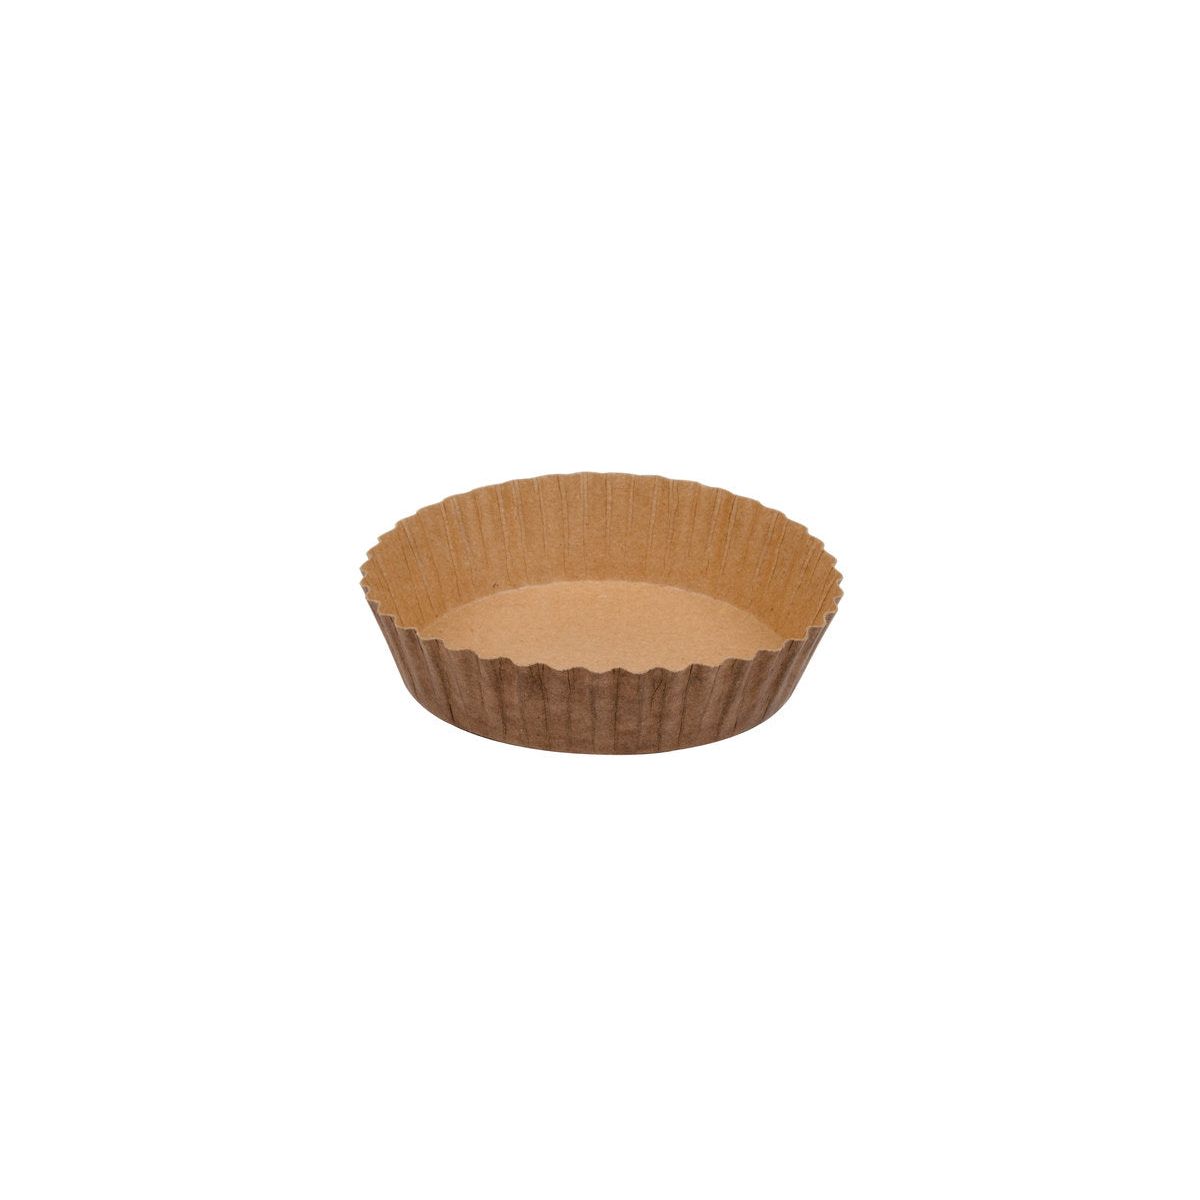 Disposable Oven Safe Paper Baking Cup, Quick Release, 8 Oz, 12 Ct